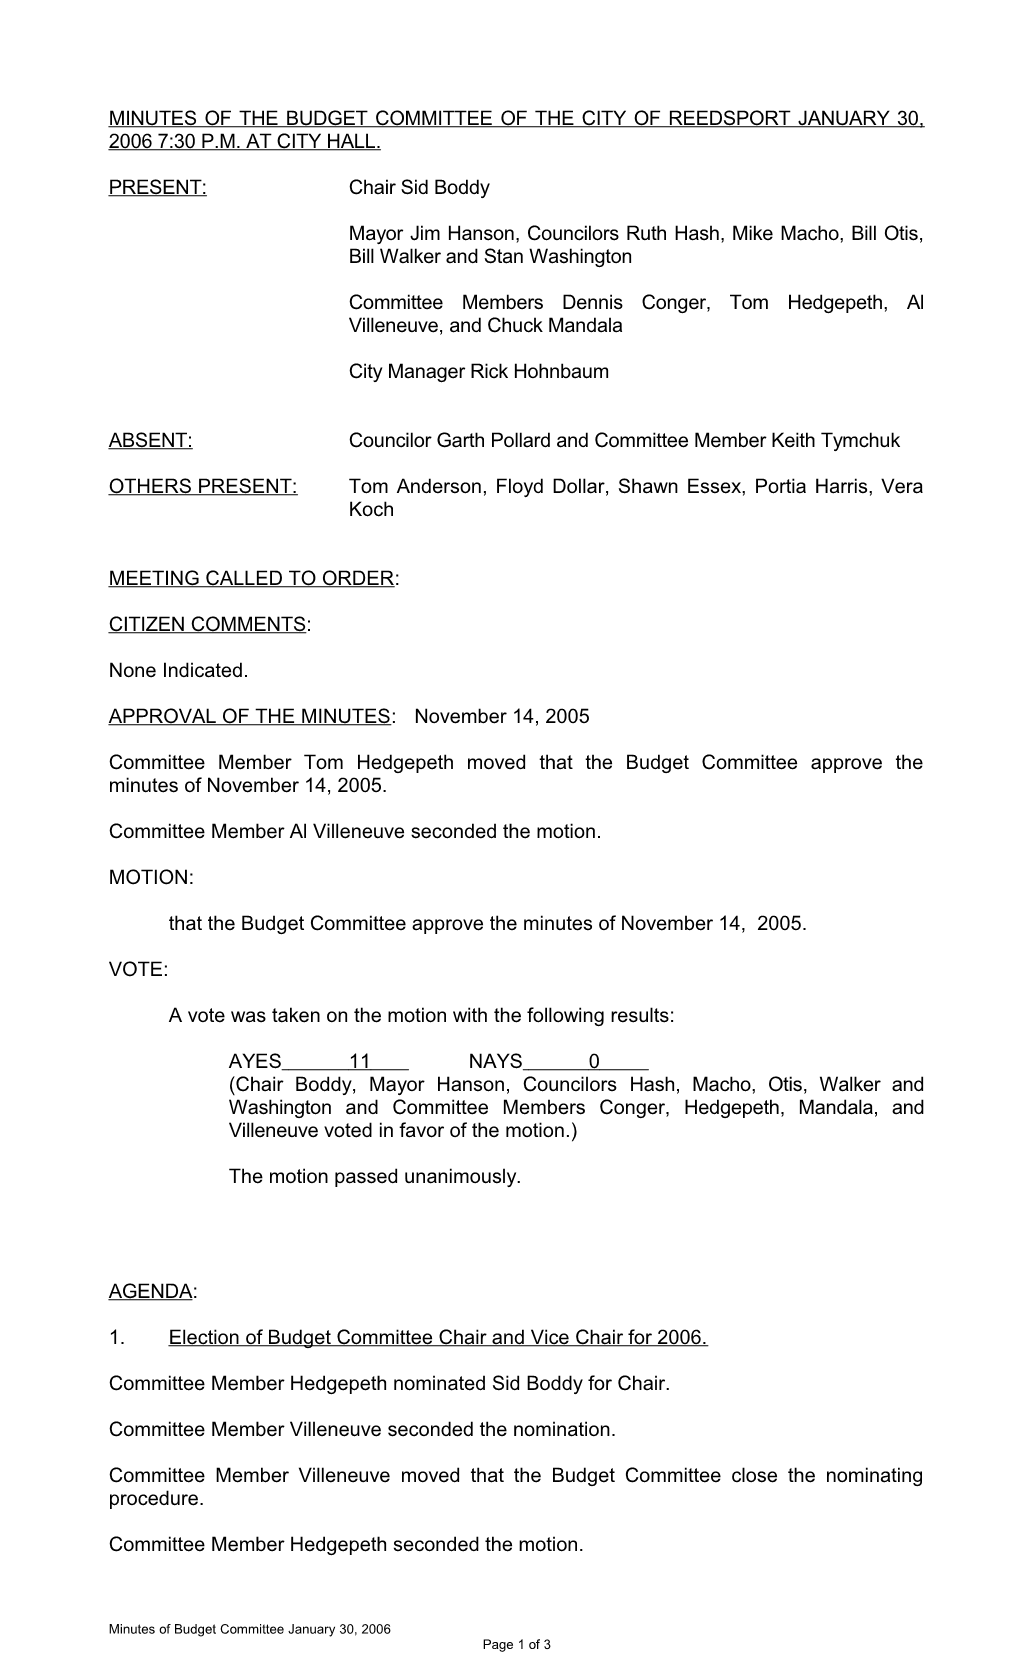 Minutes of the Budget Committee of the City of Reedsport January 30, 2006 7:30 P.M. At